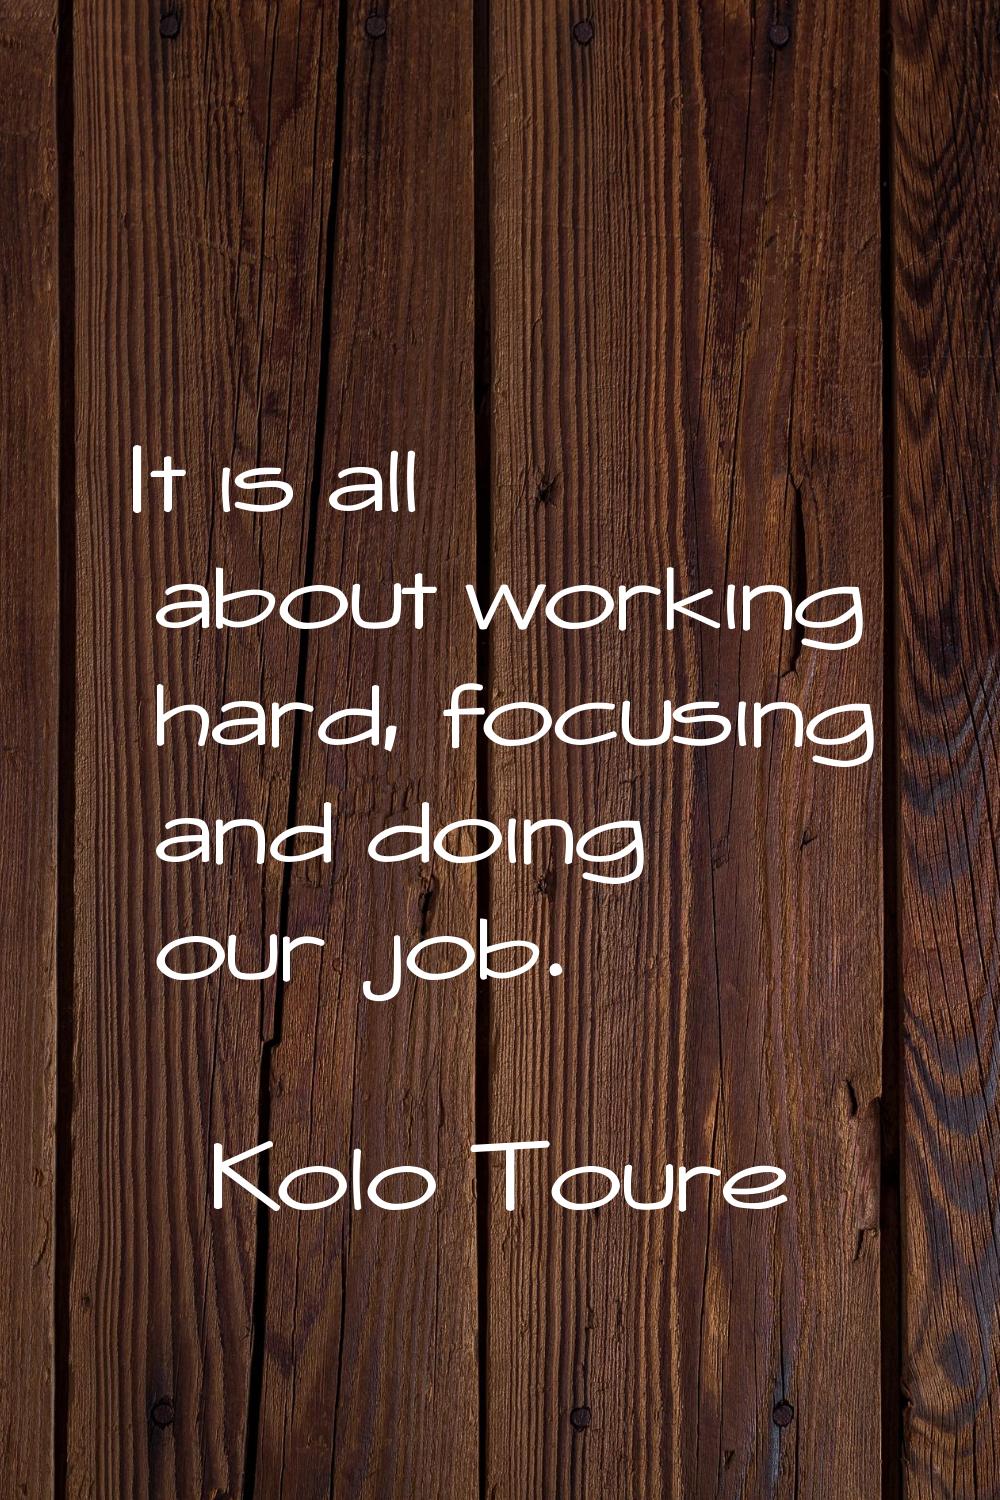 It is all about working hard, focusing and doing our job.